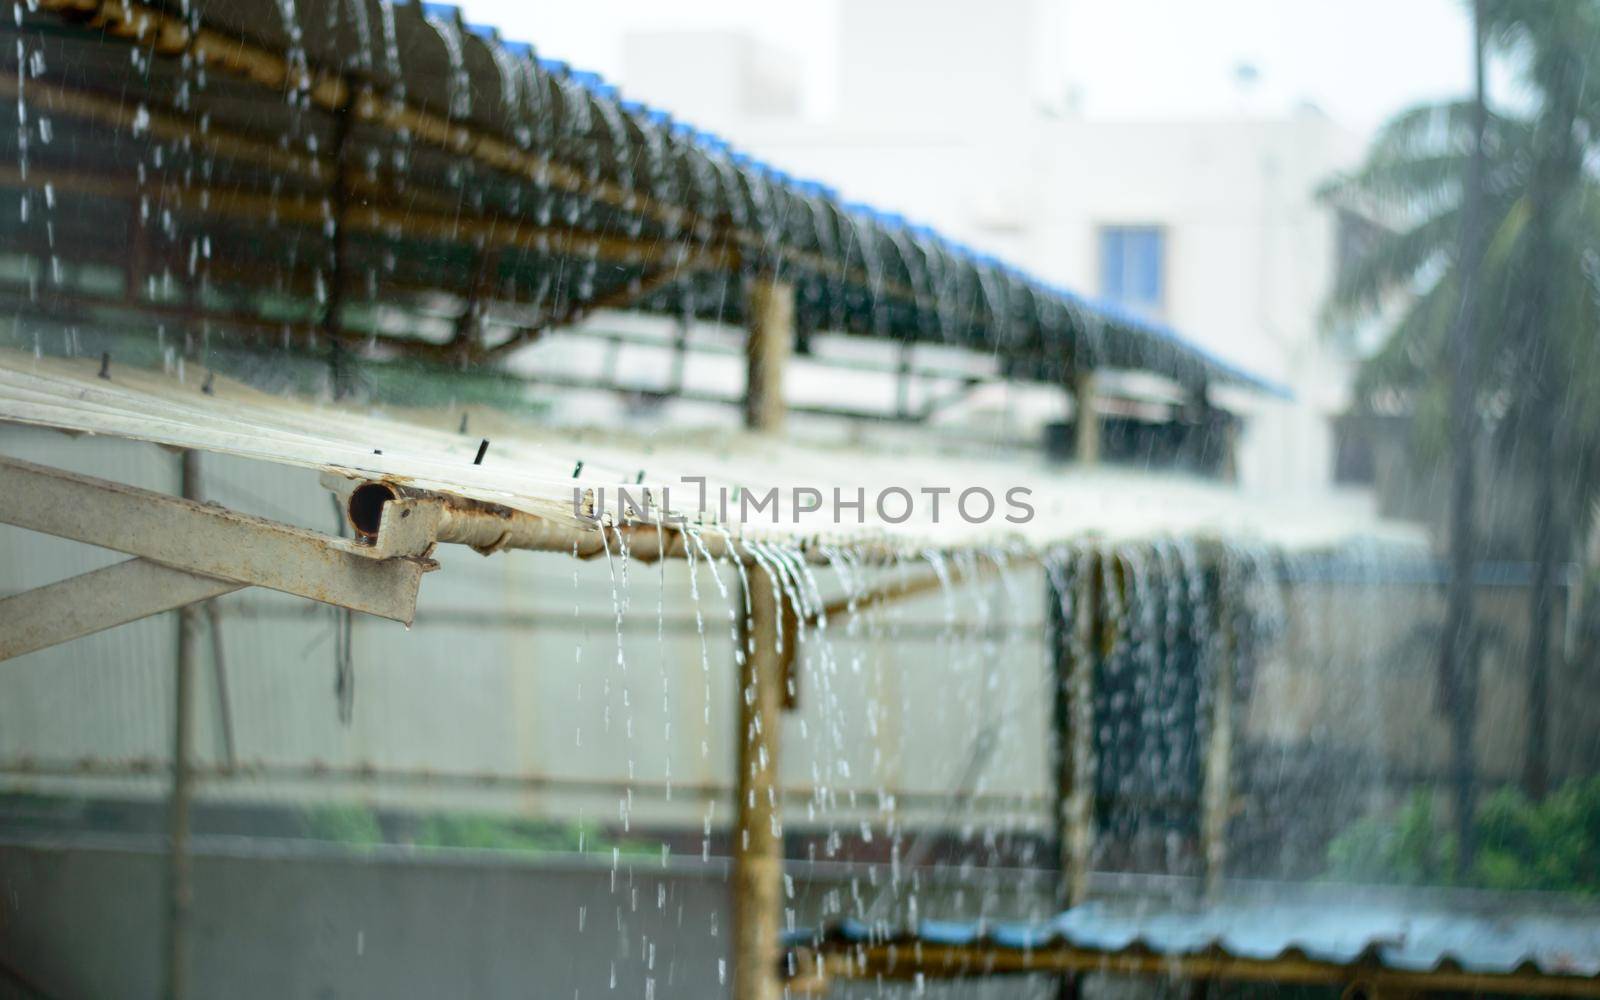 Rain on a Tin Roof. Rain Falling from the Roof. Rainy day nature background. Selective Focus on Foreground by sudiptabhowmick